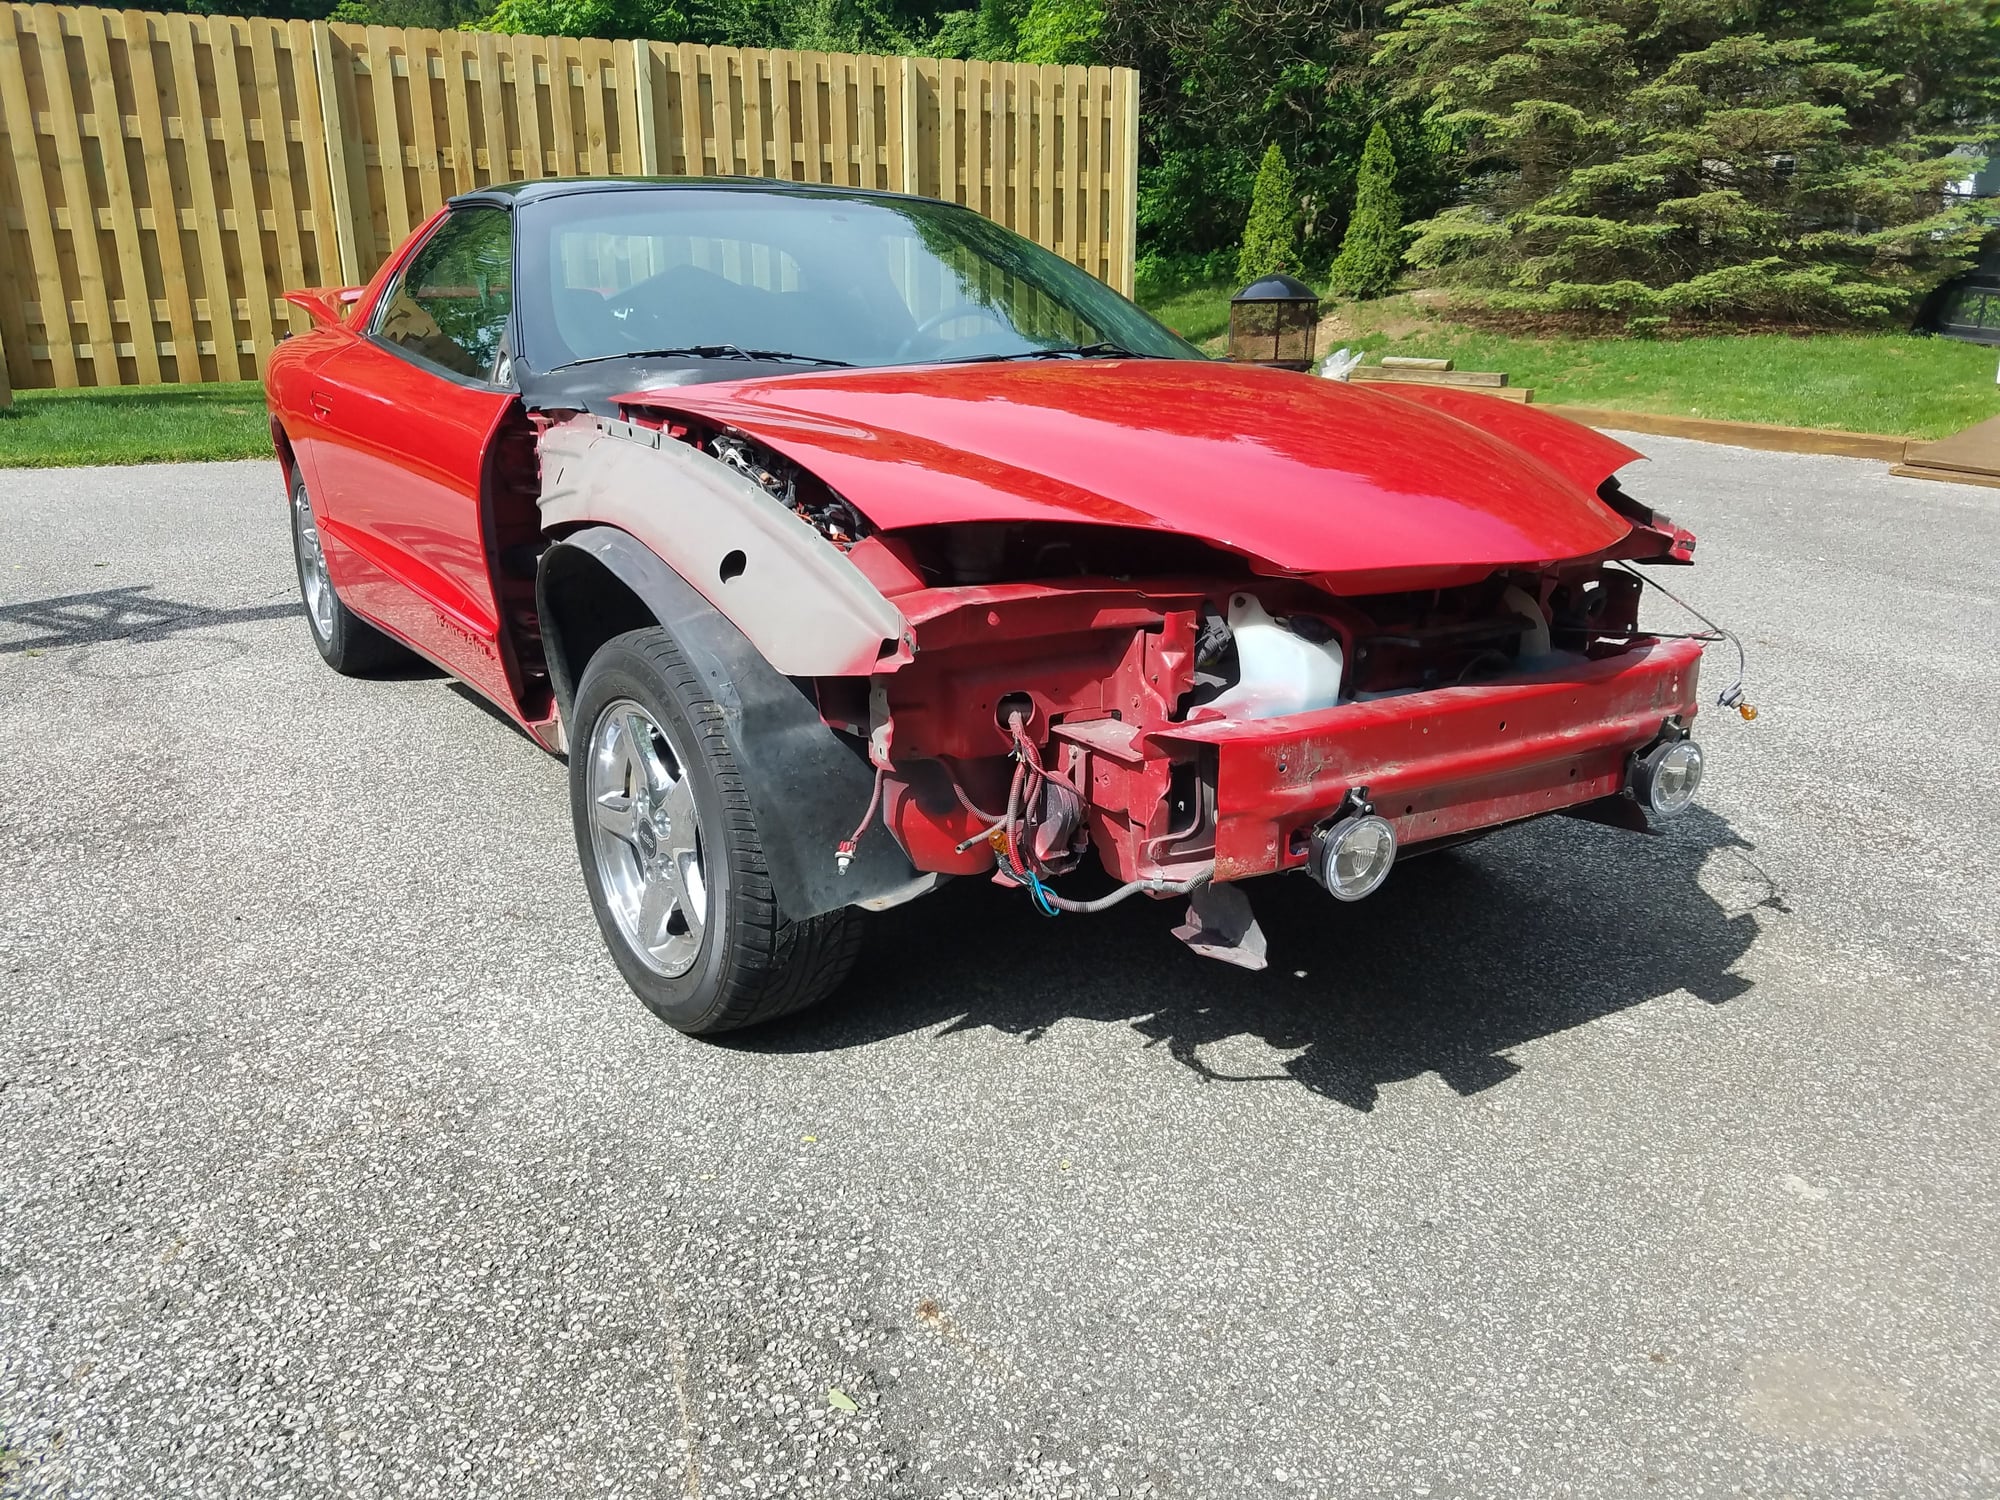 1999 Pontiac Firebird - 1999 Trans Am 6-Speed Roller - Used - VIN 2G2FV22G1X2219418 - 122,000 Miles - 2WD - Manual - Coupe - Red - La Porte, IN 46350, United States